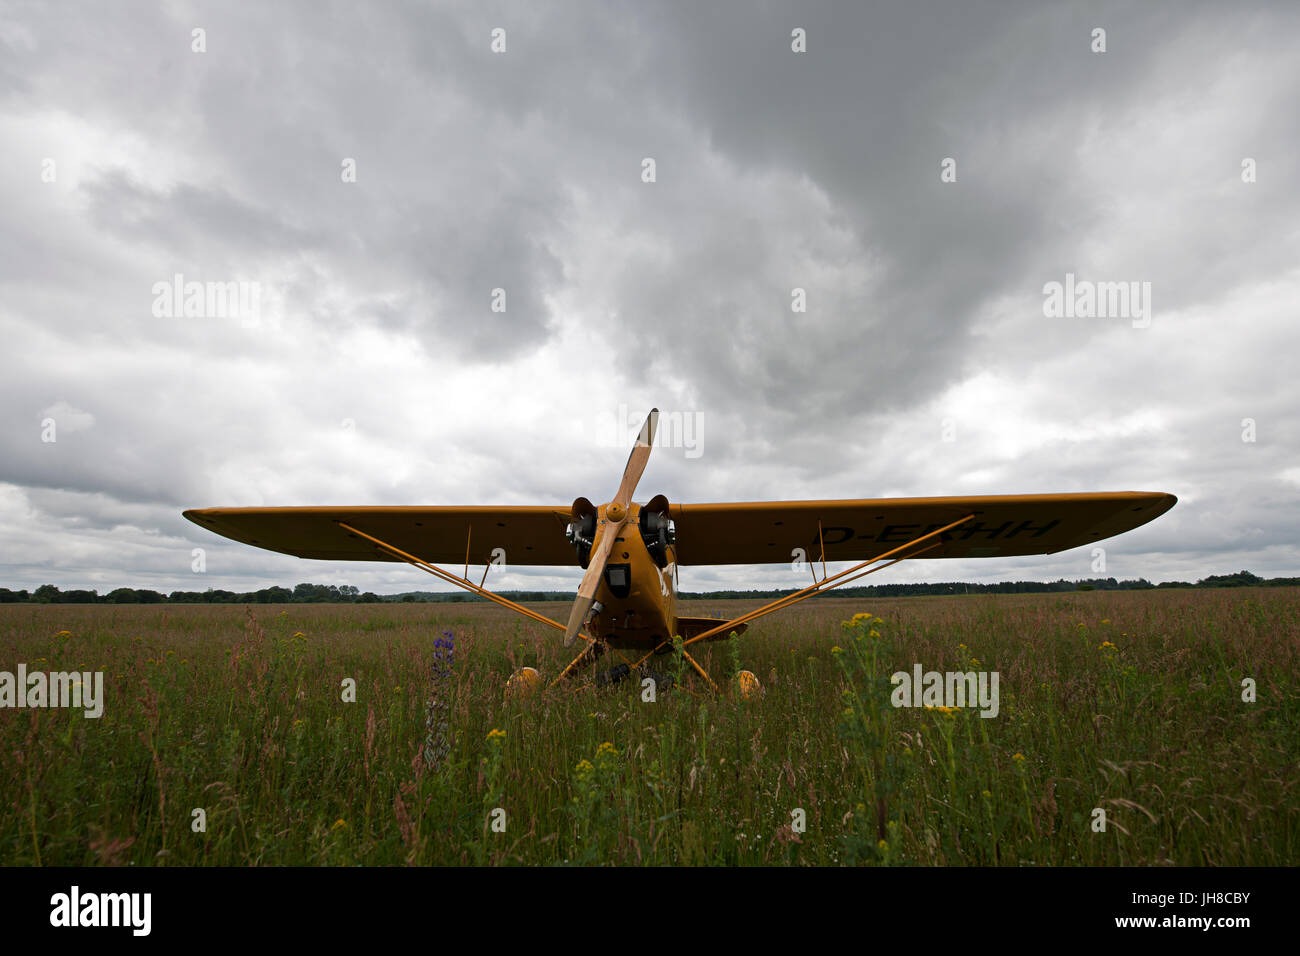 an old airplane on a field ready to take off Stock Photo